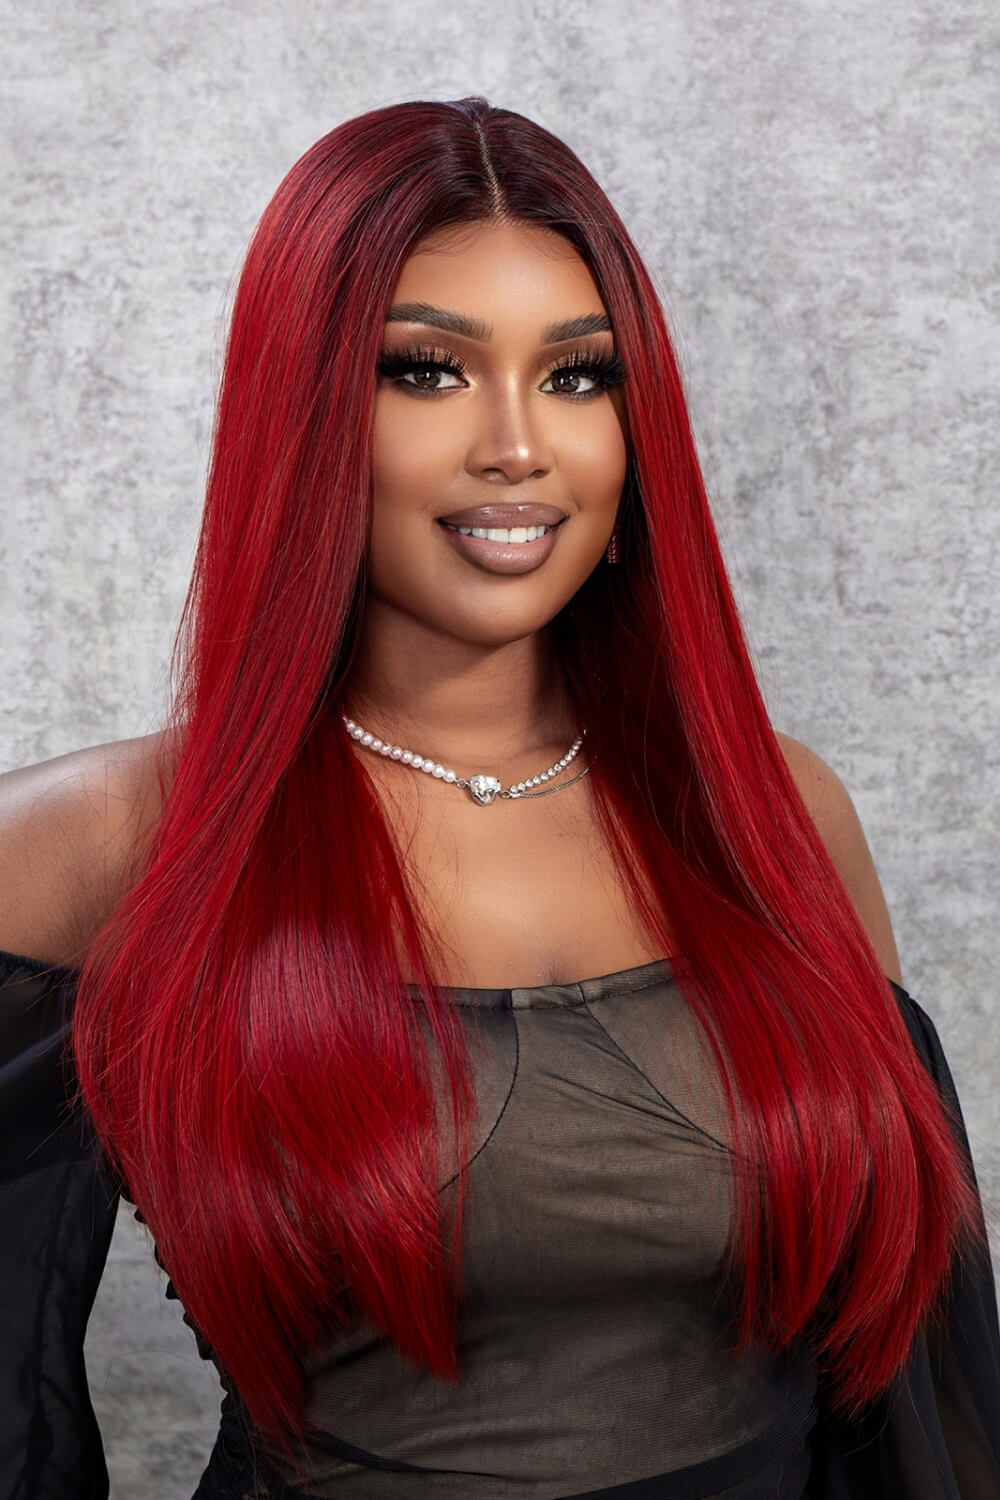 13*2" Lace Front Wigs- Straight 26" with a 150% rated Density - Synthetic Hair Accessories